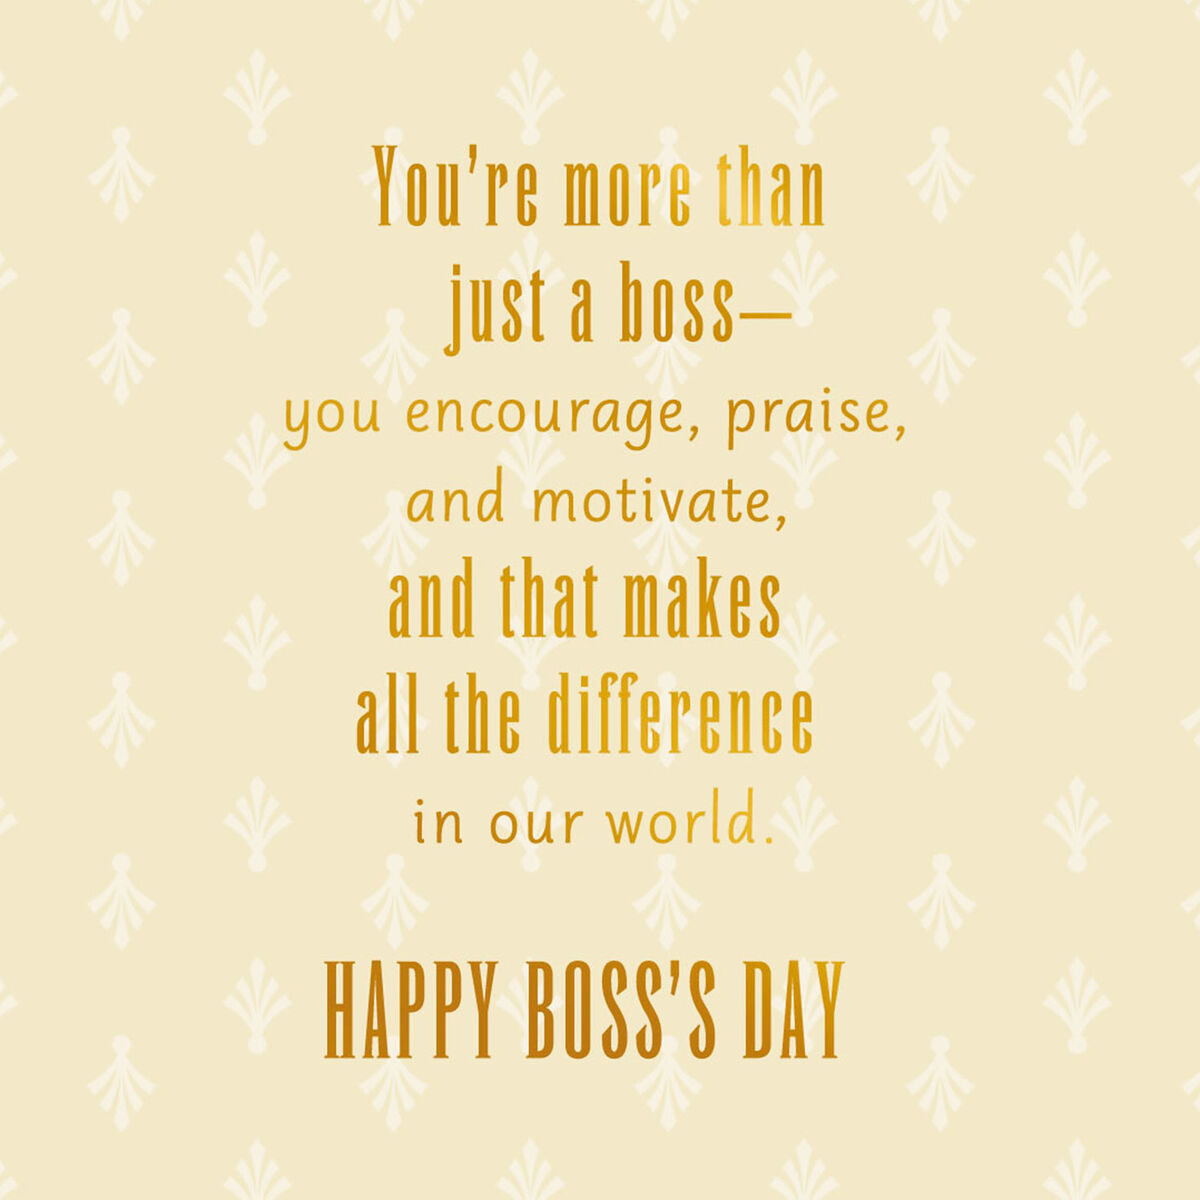 You Make a Difference Boss's Day Card From Us - Greeting Cards - Hallmark